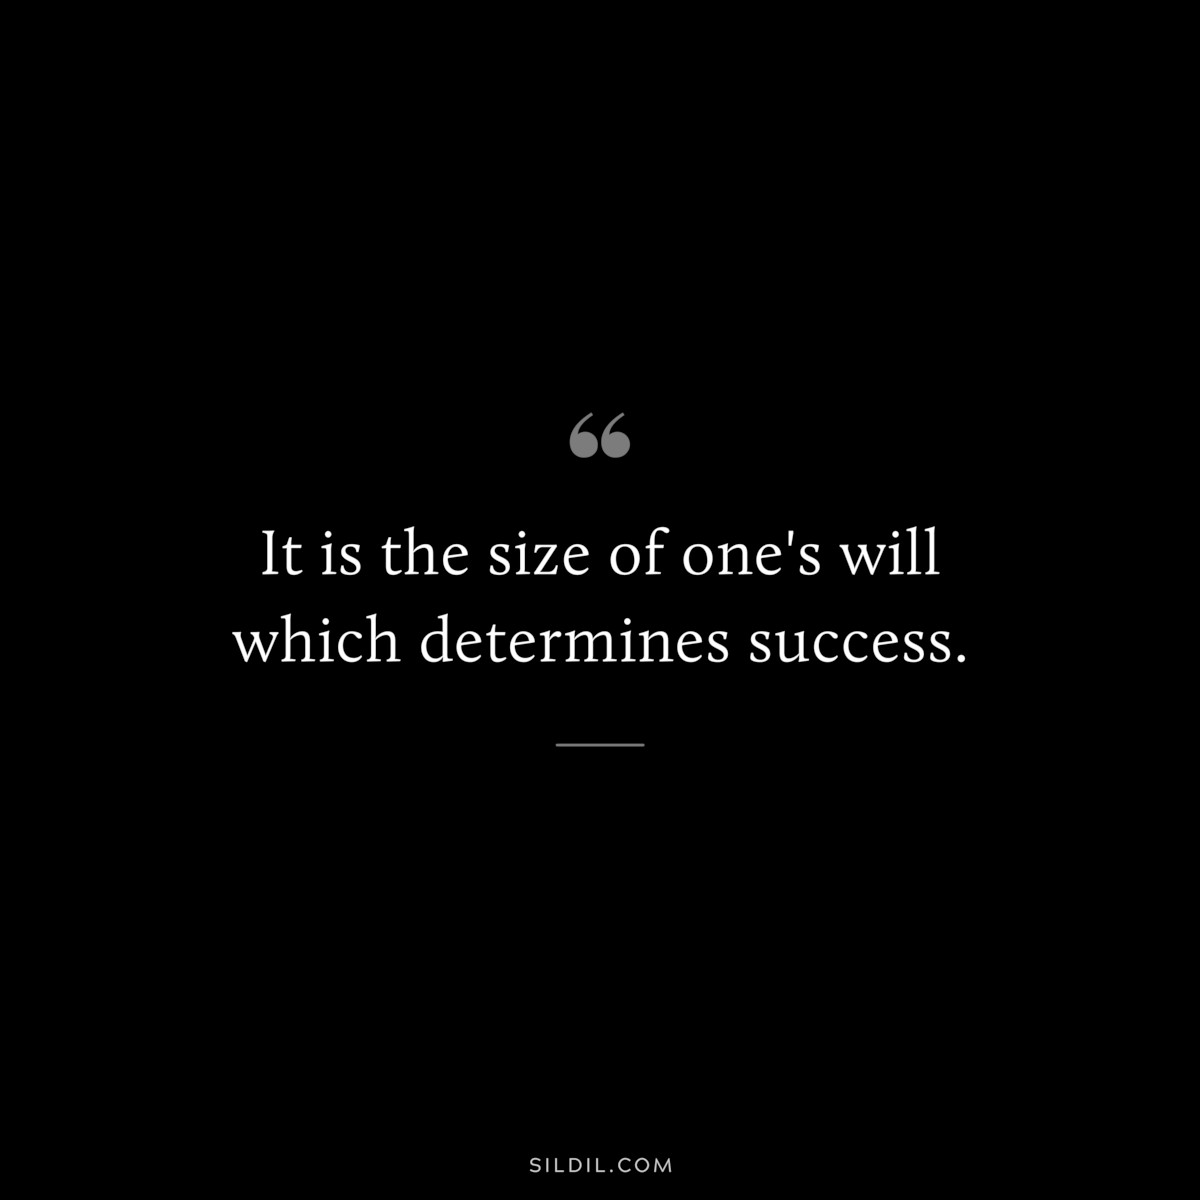 It is the size of one's will which determines success.